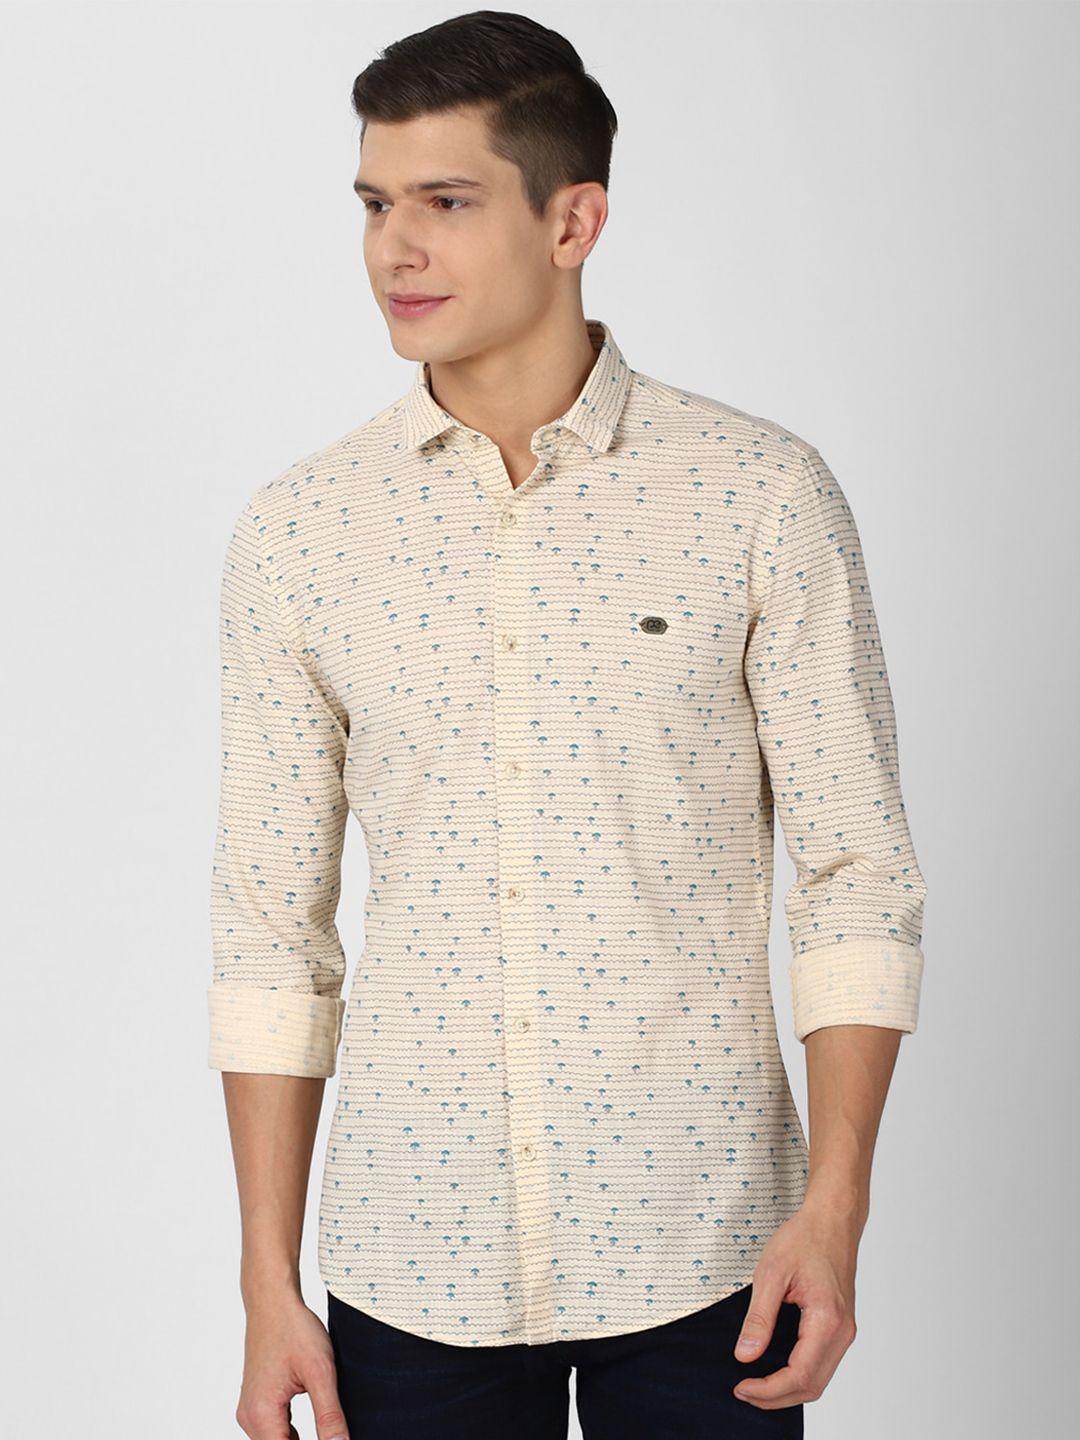 peter england casuals men cream-coloured slim fit printed??????? pure cotton casual shirt